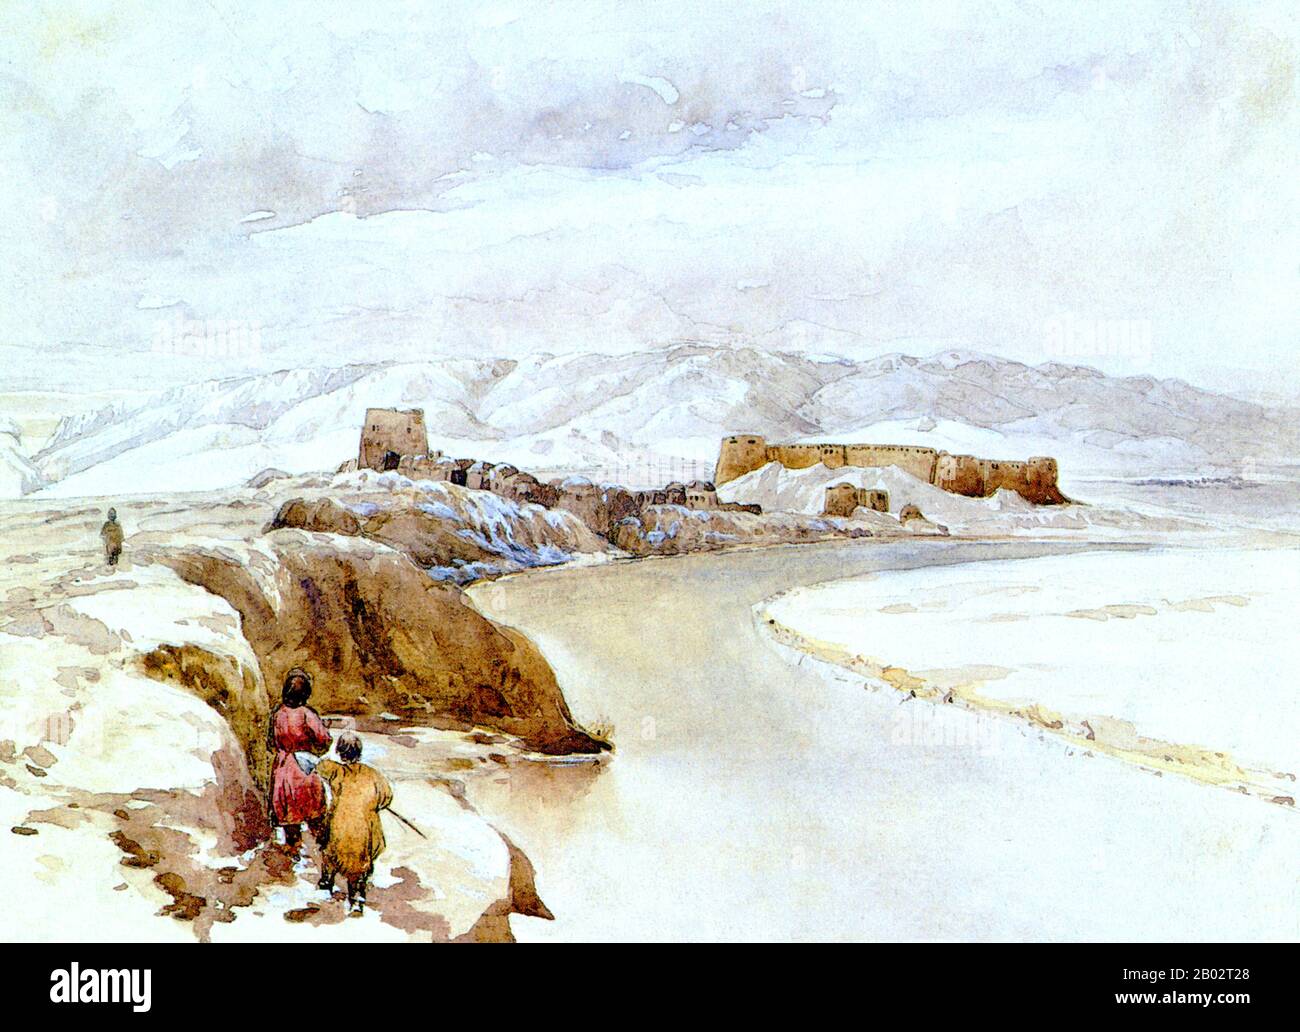 Bala Murghab, also called Morghab, is a village in Badghis Province in north-western Afghanistan. It is the district center for the Murghab District.  Colonel Sir Thomas Hungerford Holdich, KCMG, KCIE, CB (1843–1929) was an English geographer and president of the Royal Geographical Society. He is best known as Superintendent of Frontier Surveys in British India and author of numerous books, including The Gates of India, The Countries of the King's Award and Political Frontiers and Boundary Making. Stock Photo